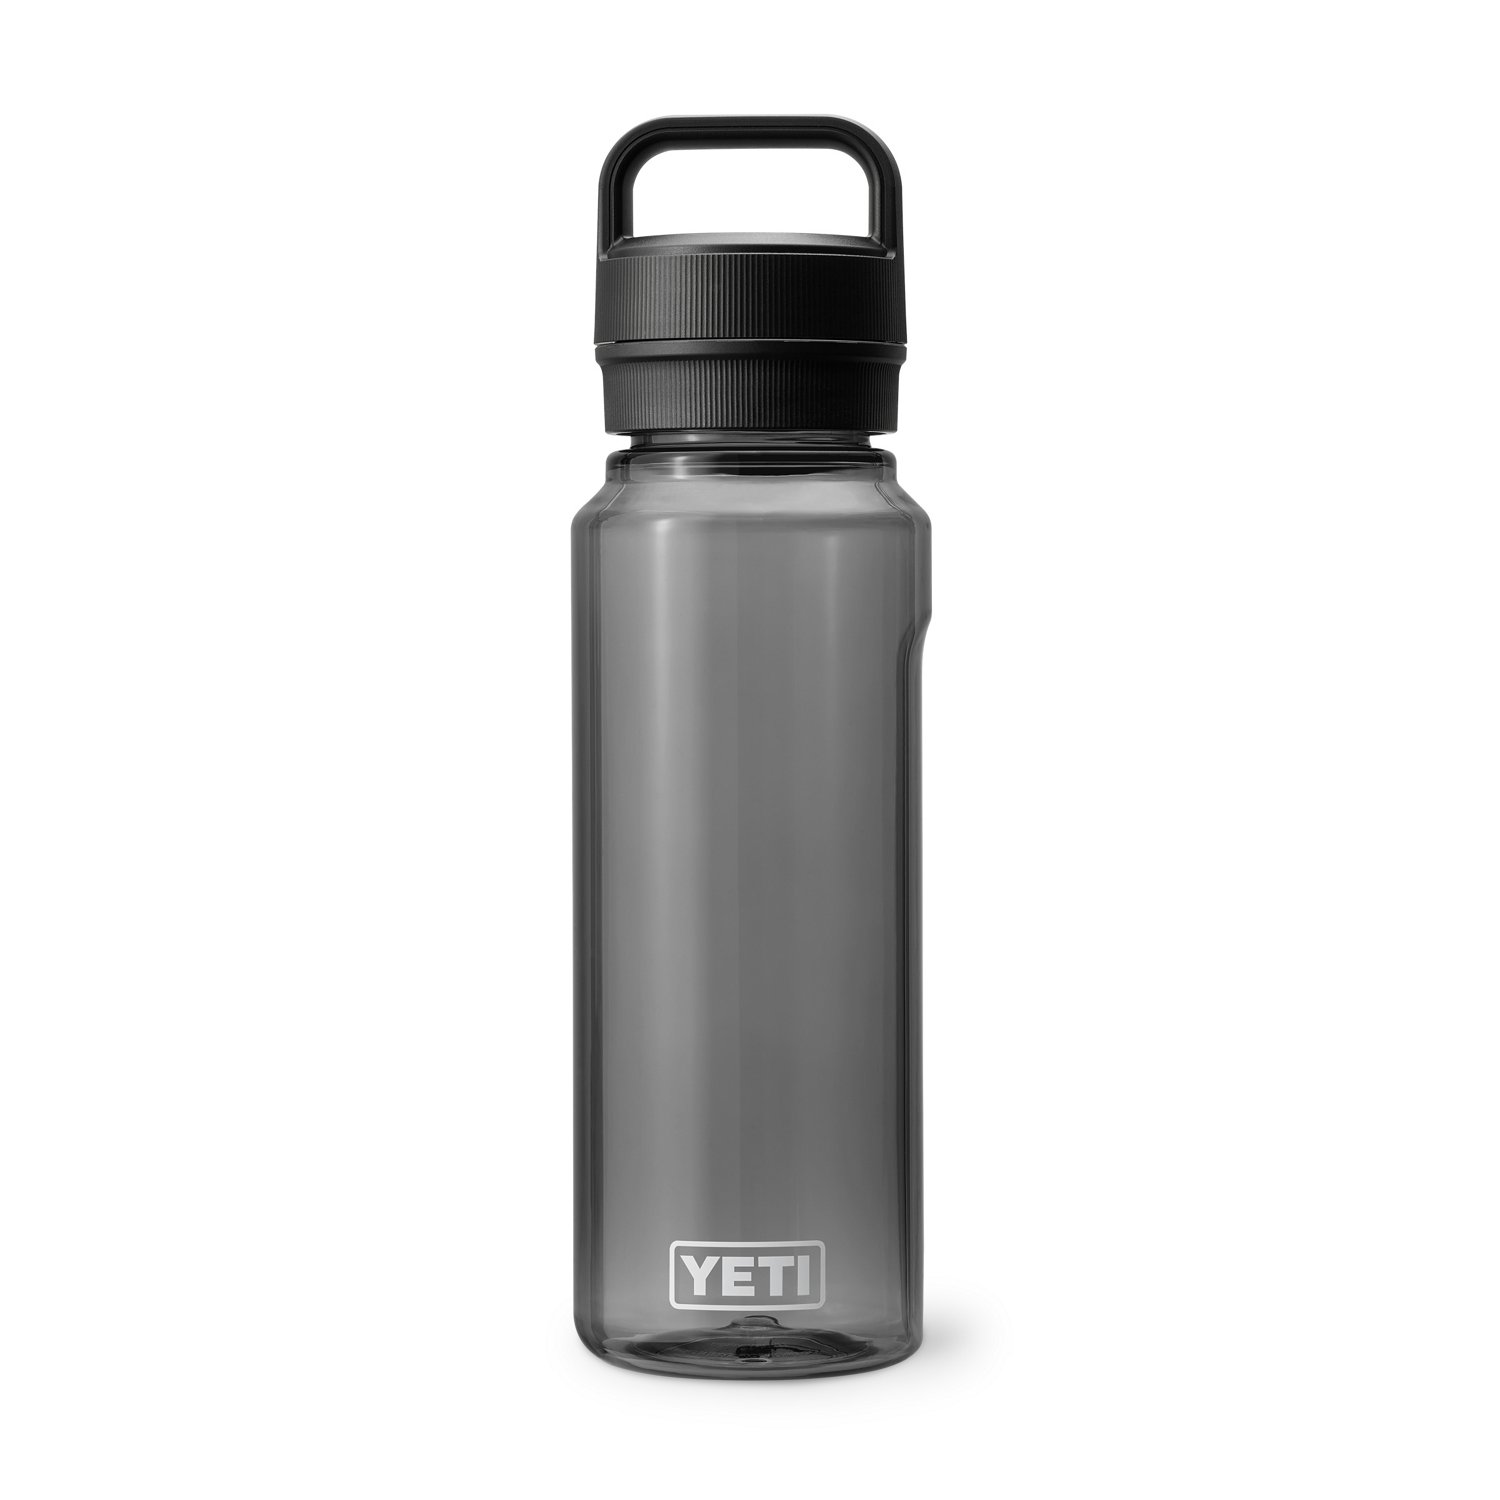 One Gallon Jug Guard for YETI (Various Colors)